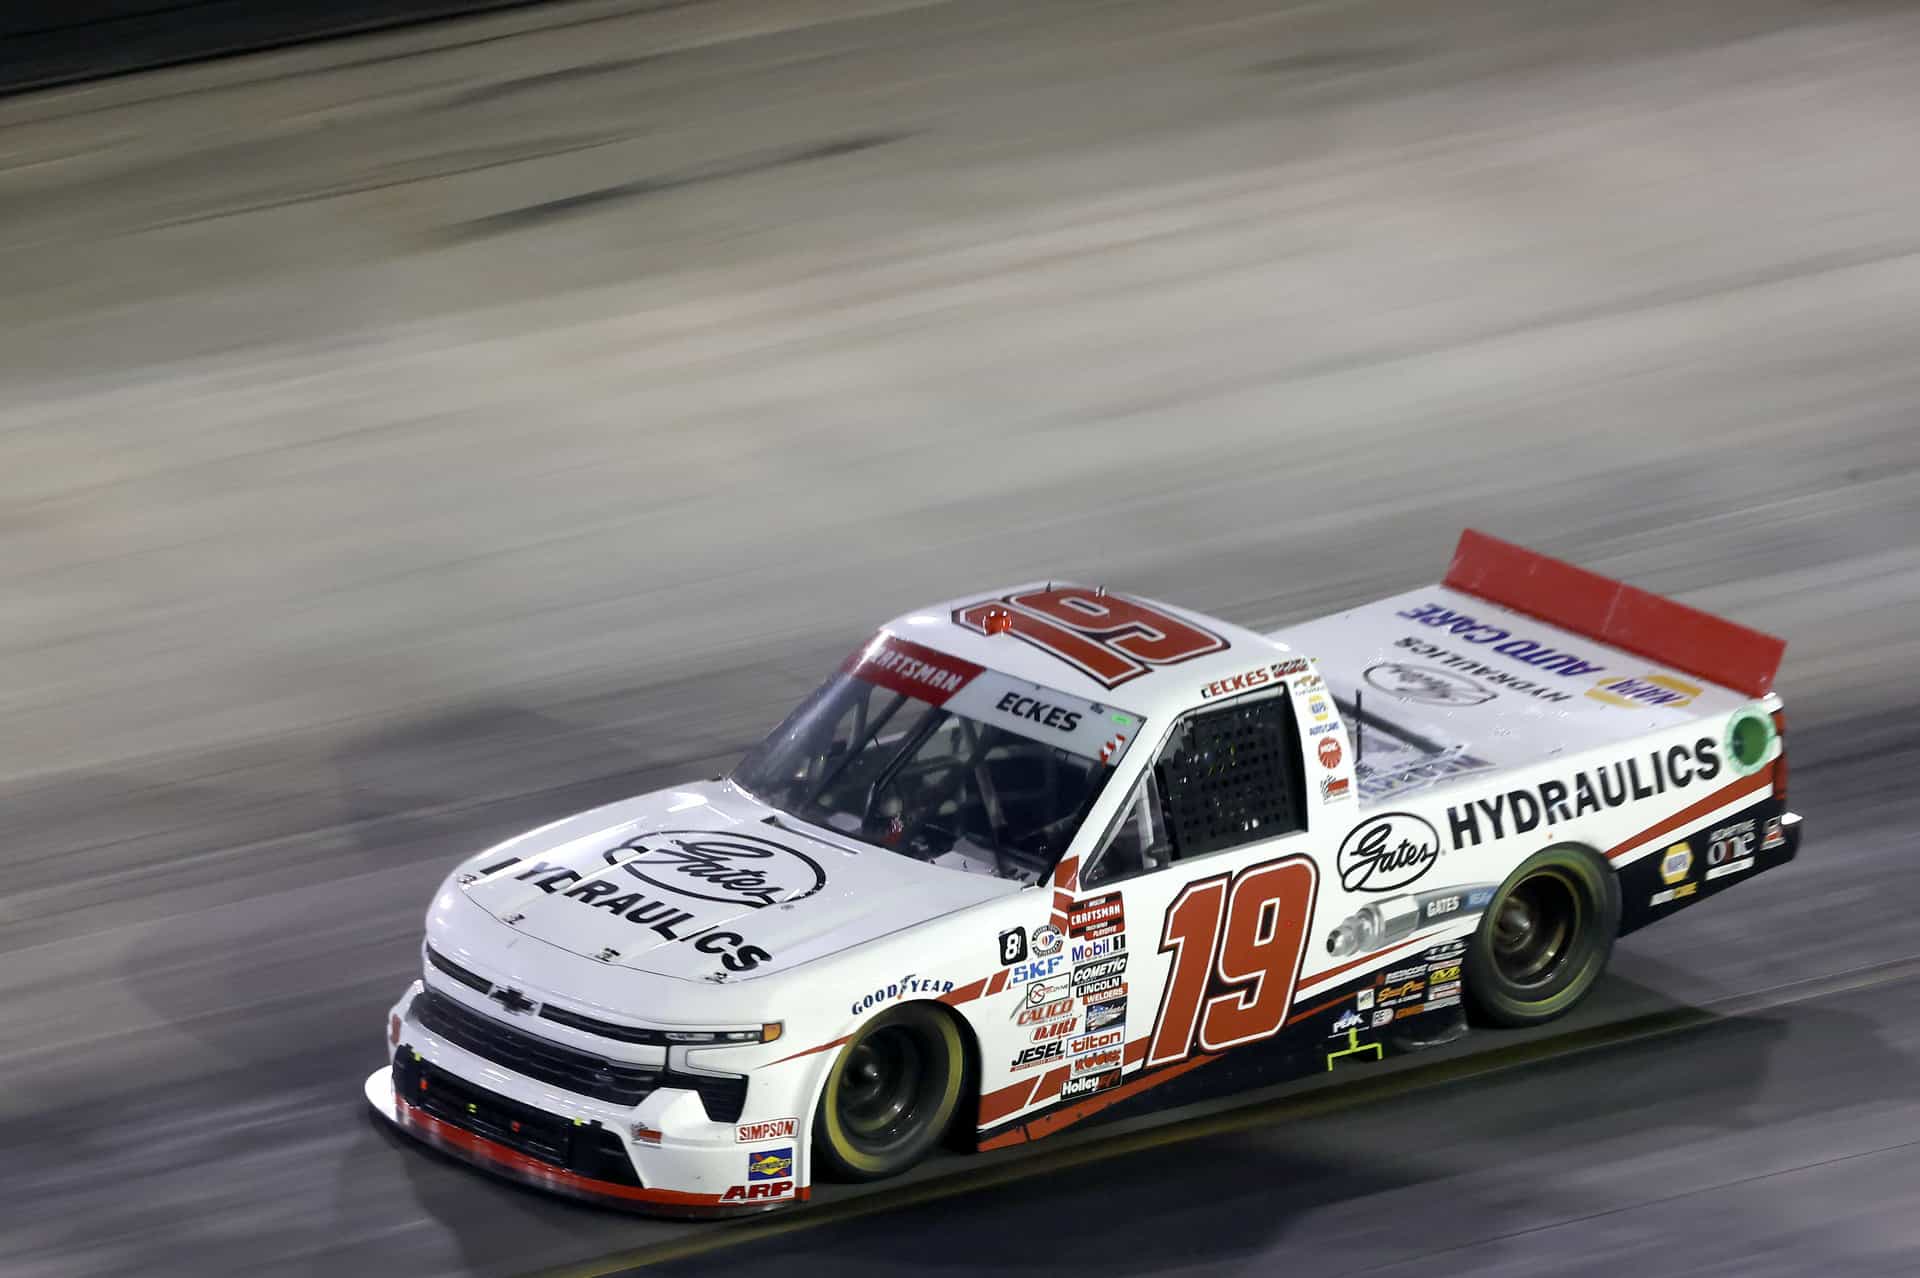 Lapped traffic ultimately cost christian eckes a chance at victory in the nascar craftsman truck series race at bristol motor speedway.